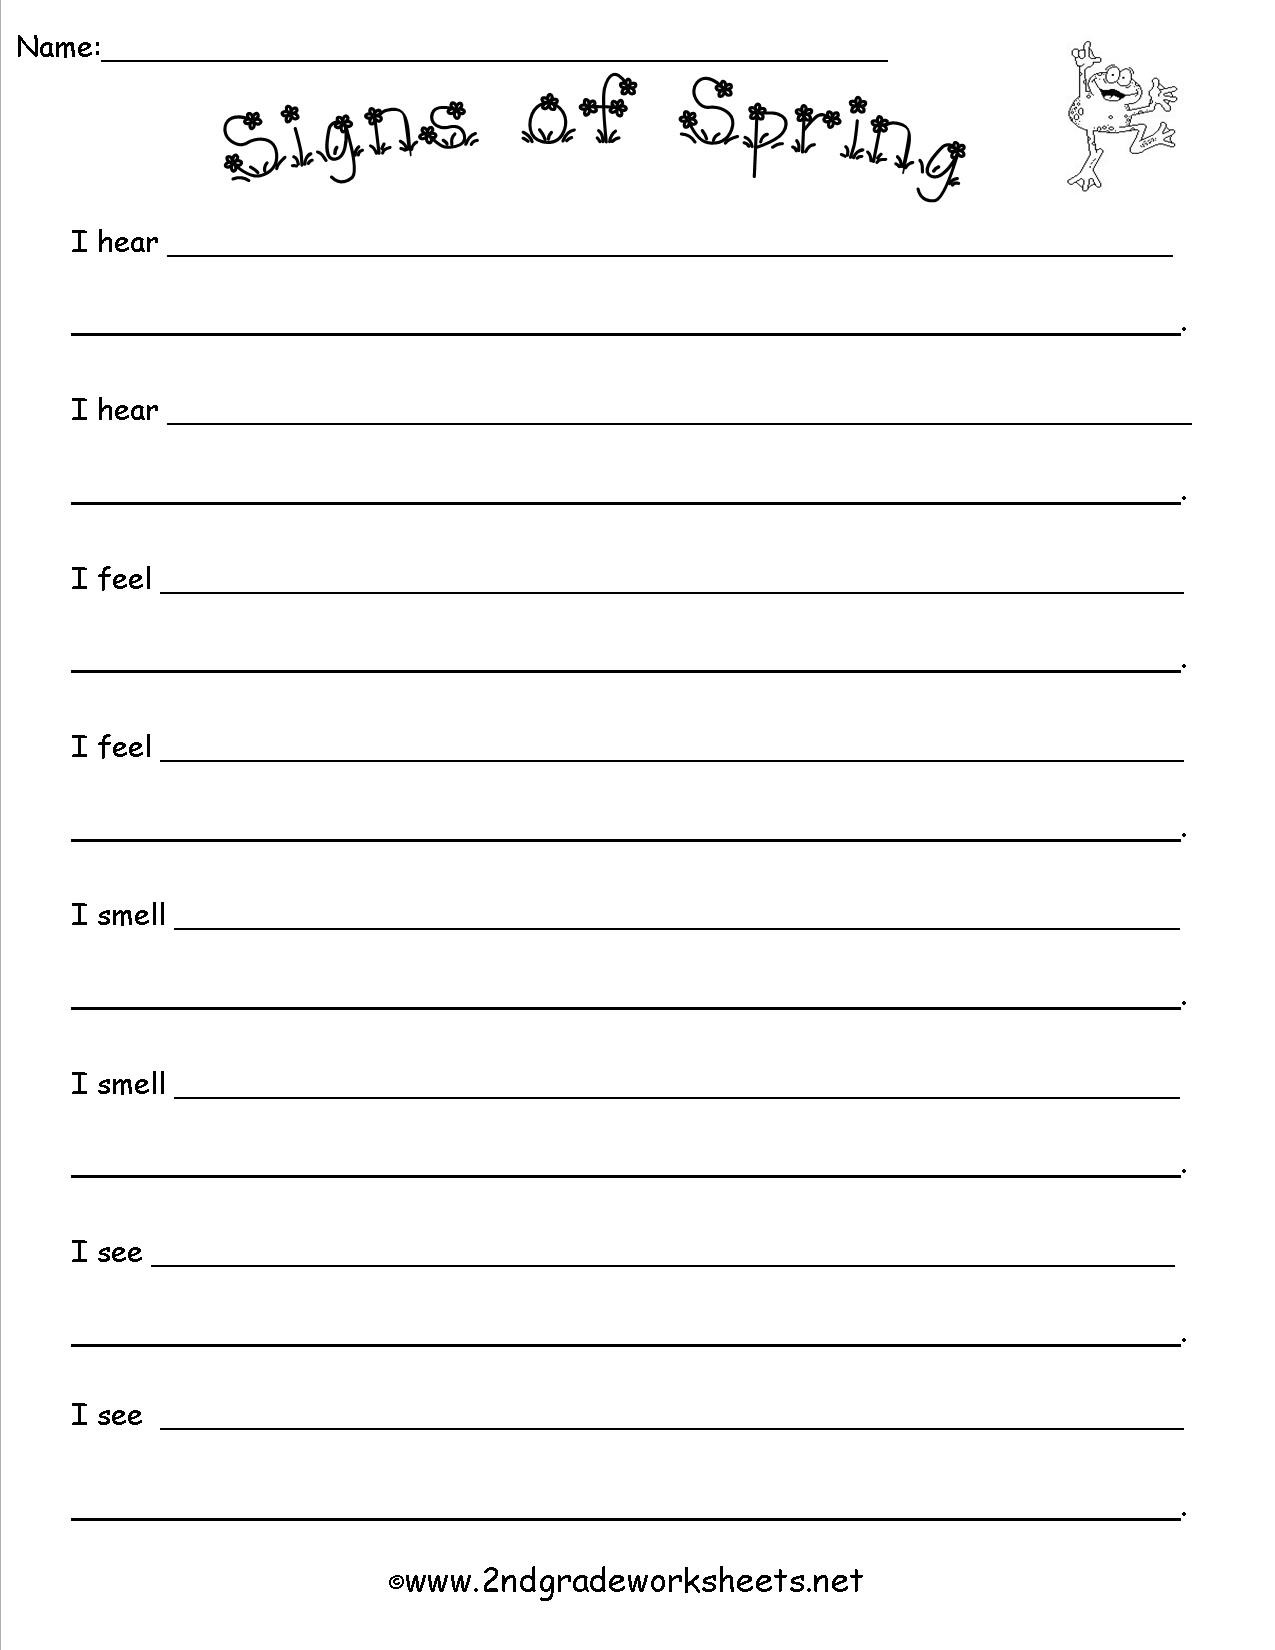 Second Grade Science Worksheets Free Second Grade Science Worksheets Free